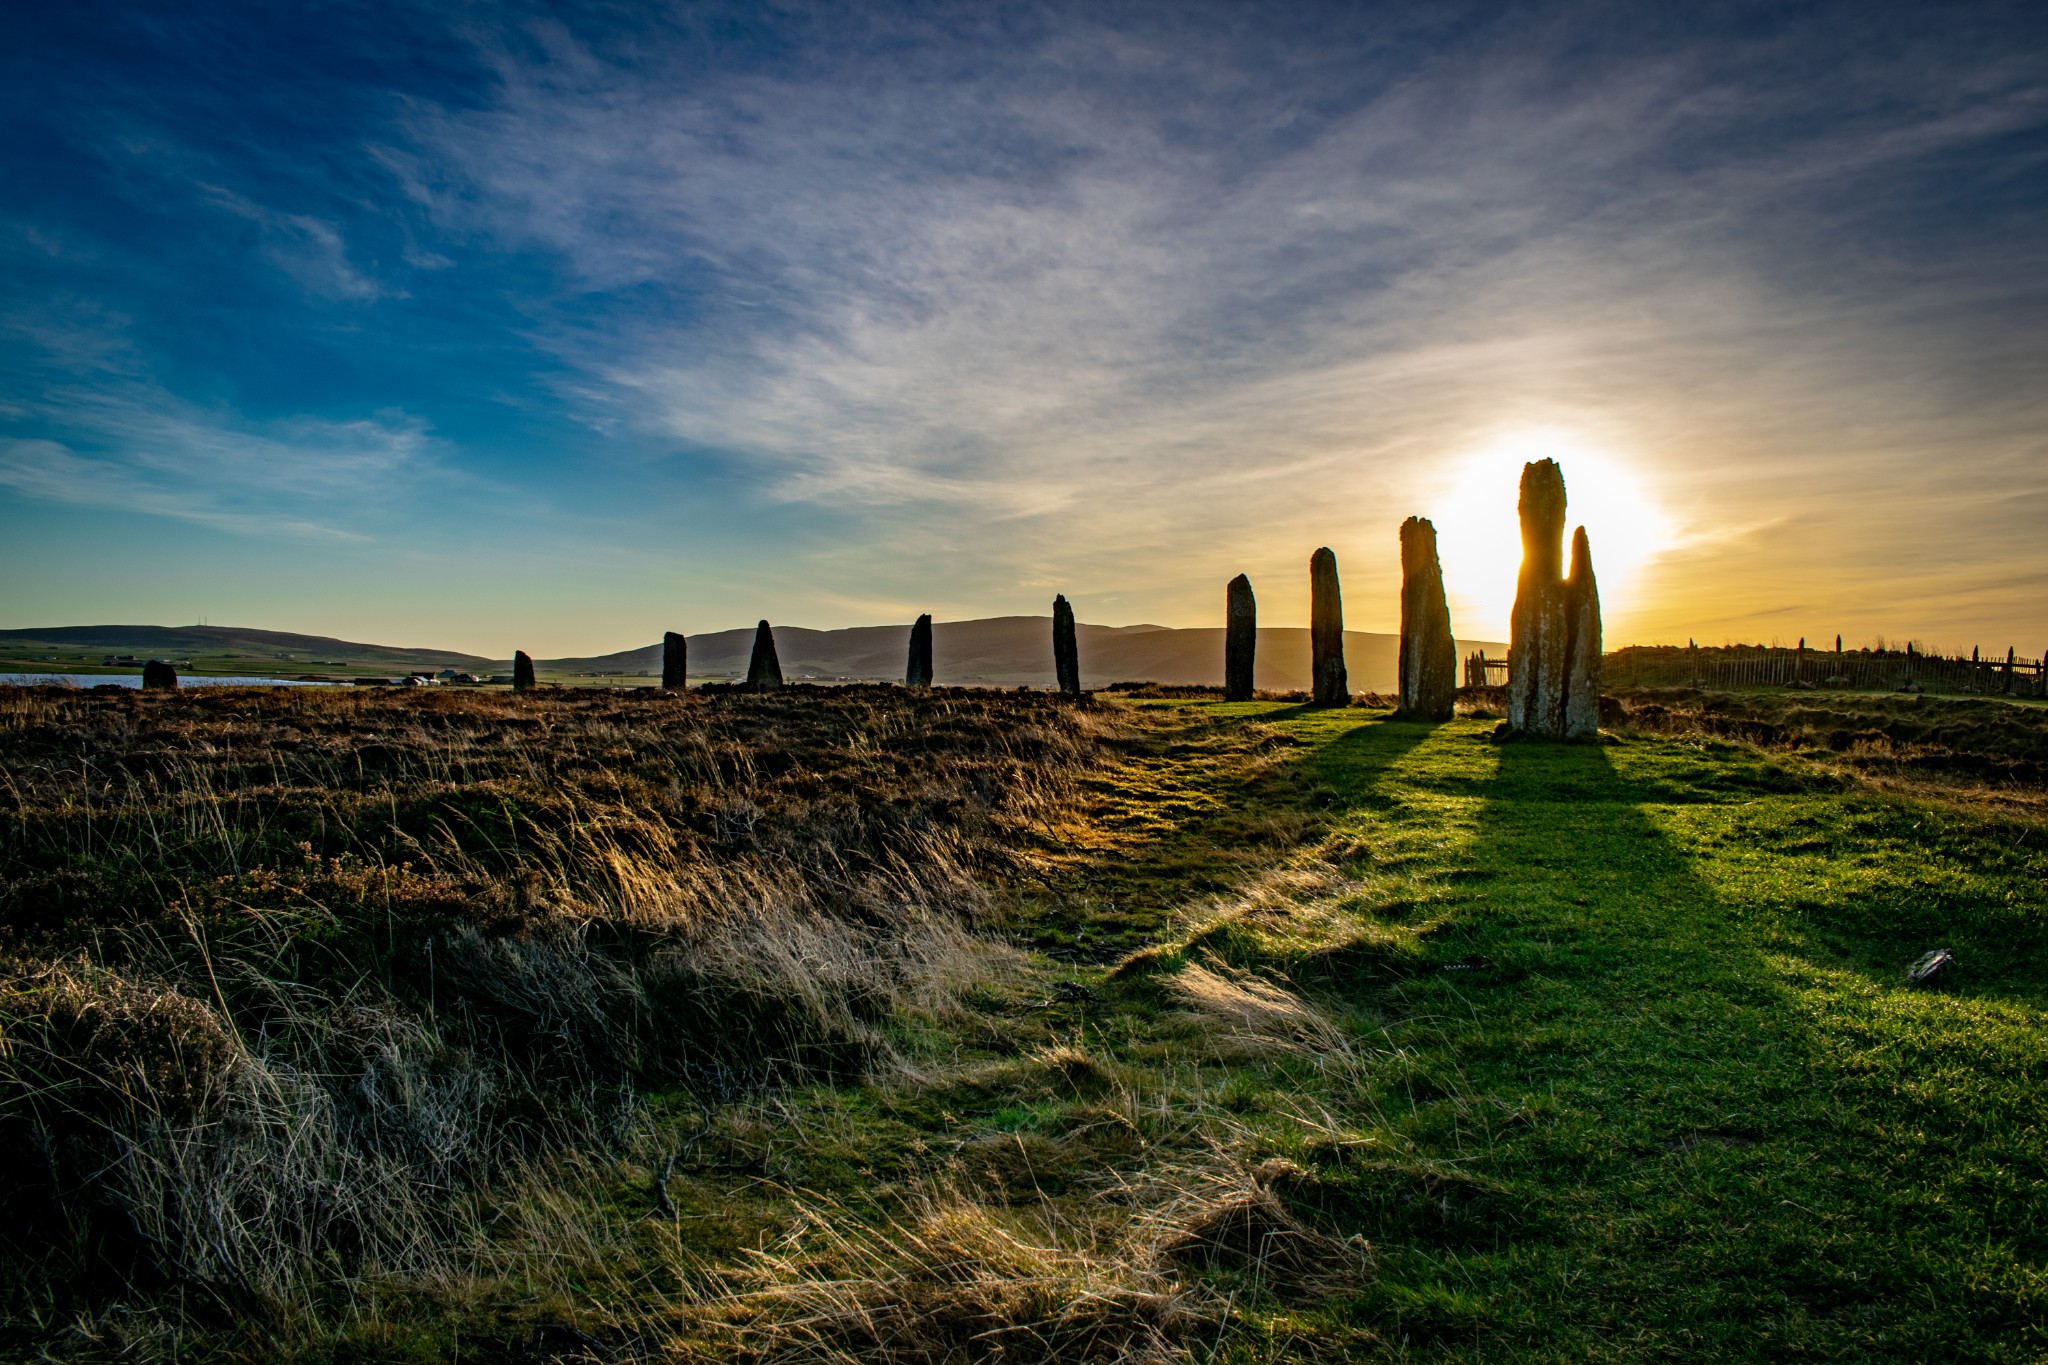 Ring of Brodgar, Orkney - image by Robb Towns